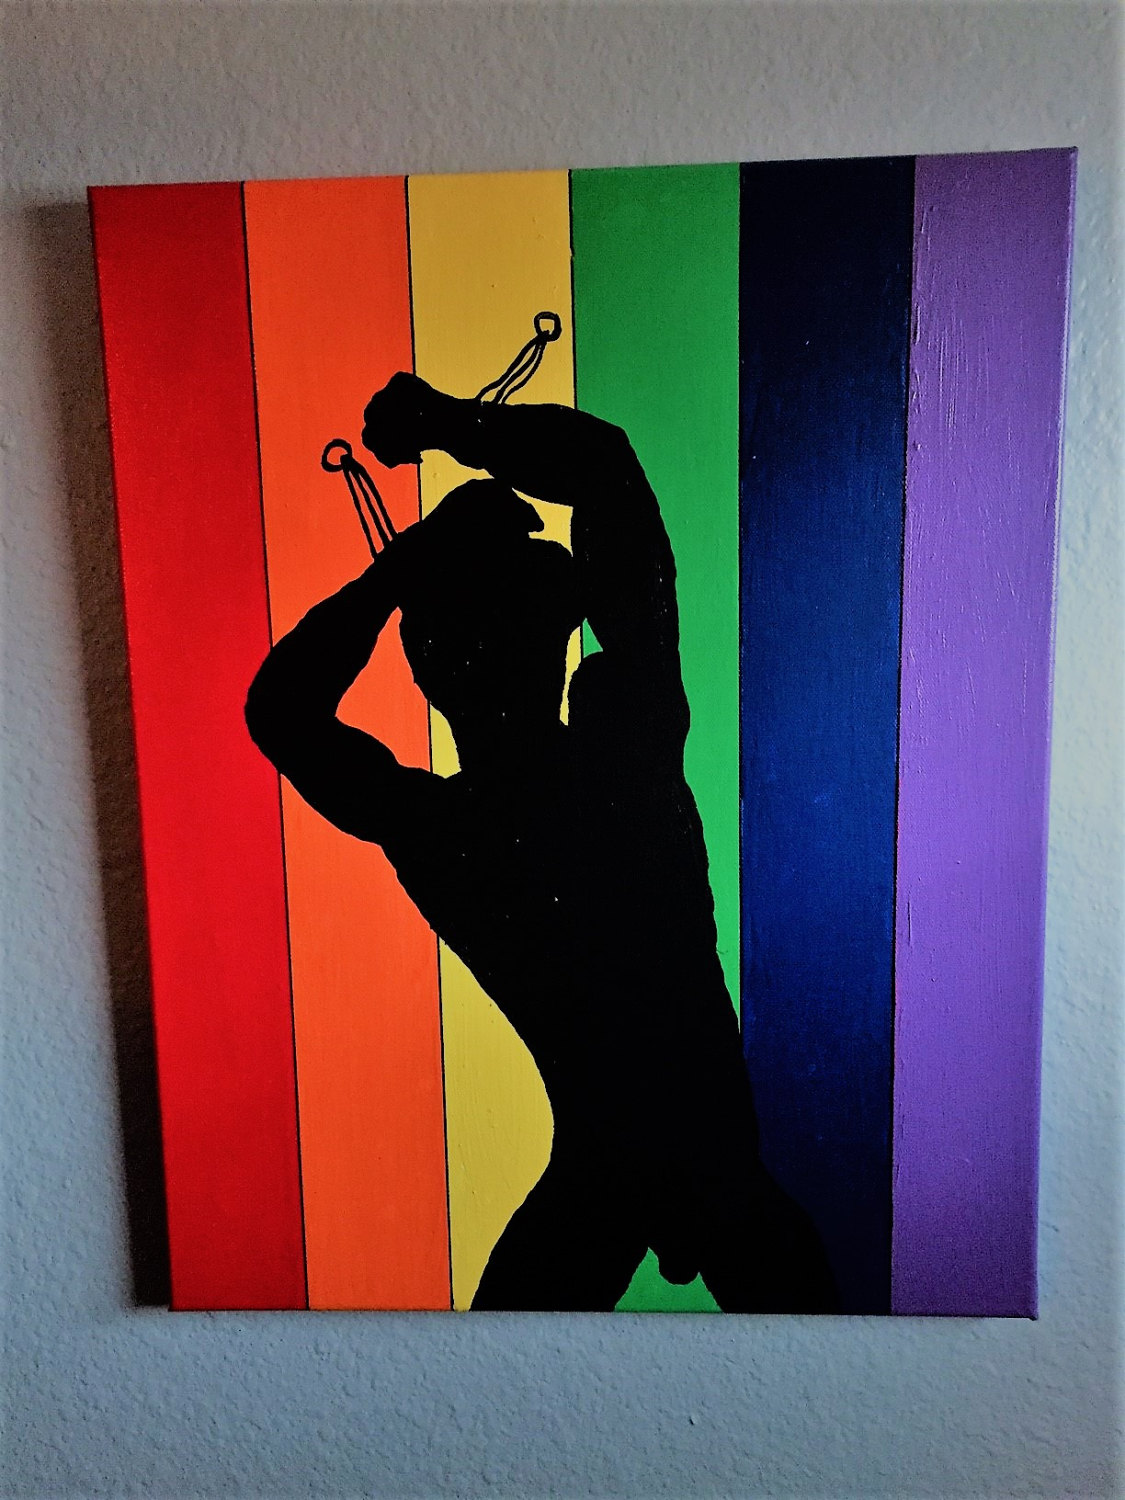 woman paints over gay pride art